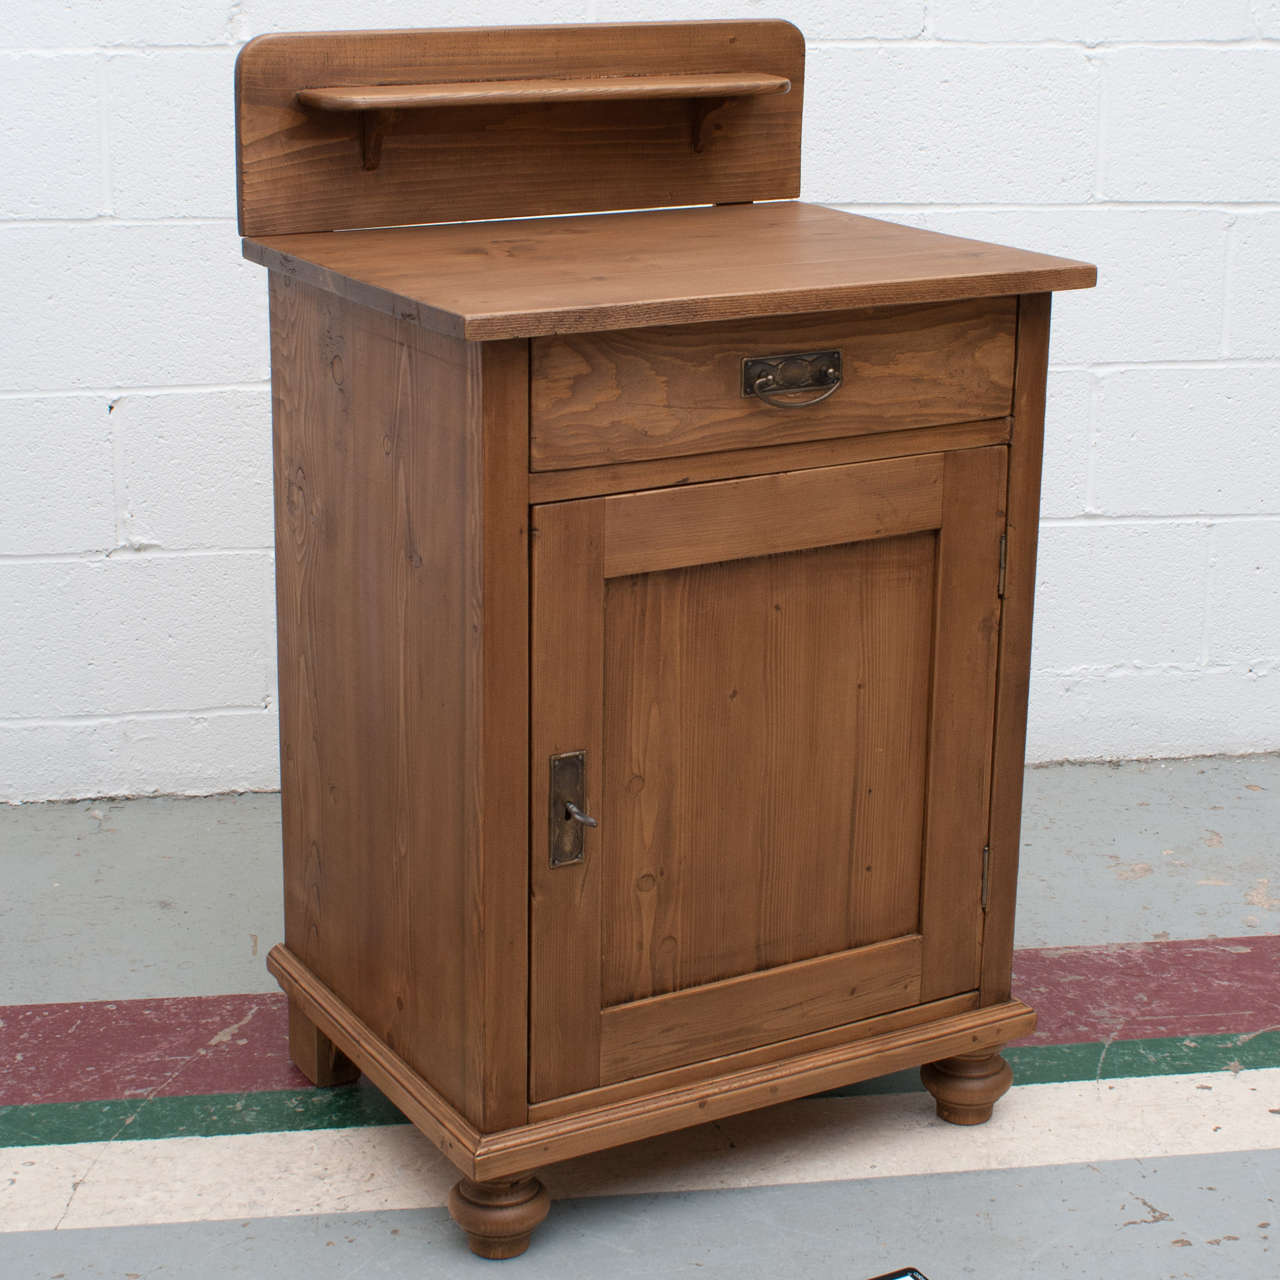 A small and versatile pine single door base, nightstand, or washstand with splashback gallery and shelf.  One hand-cut dovetailed drawer and one interior shelf.